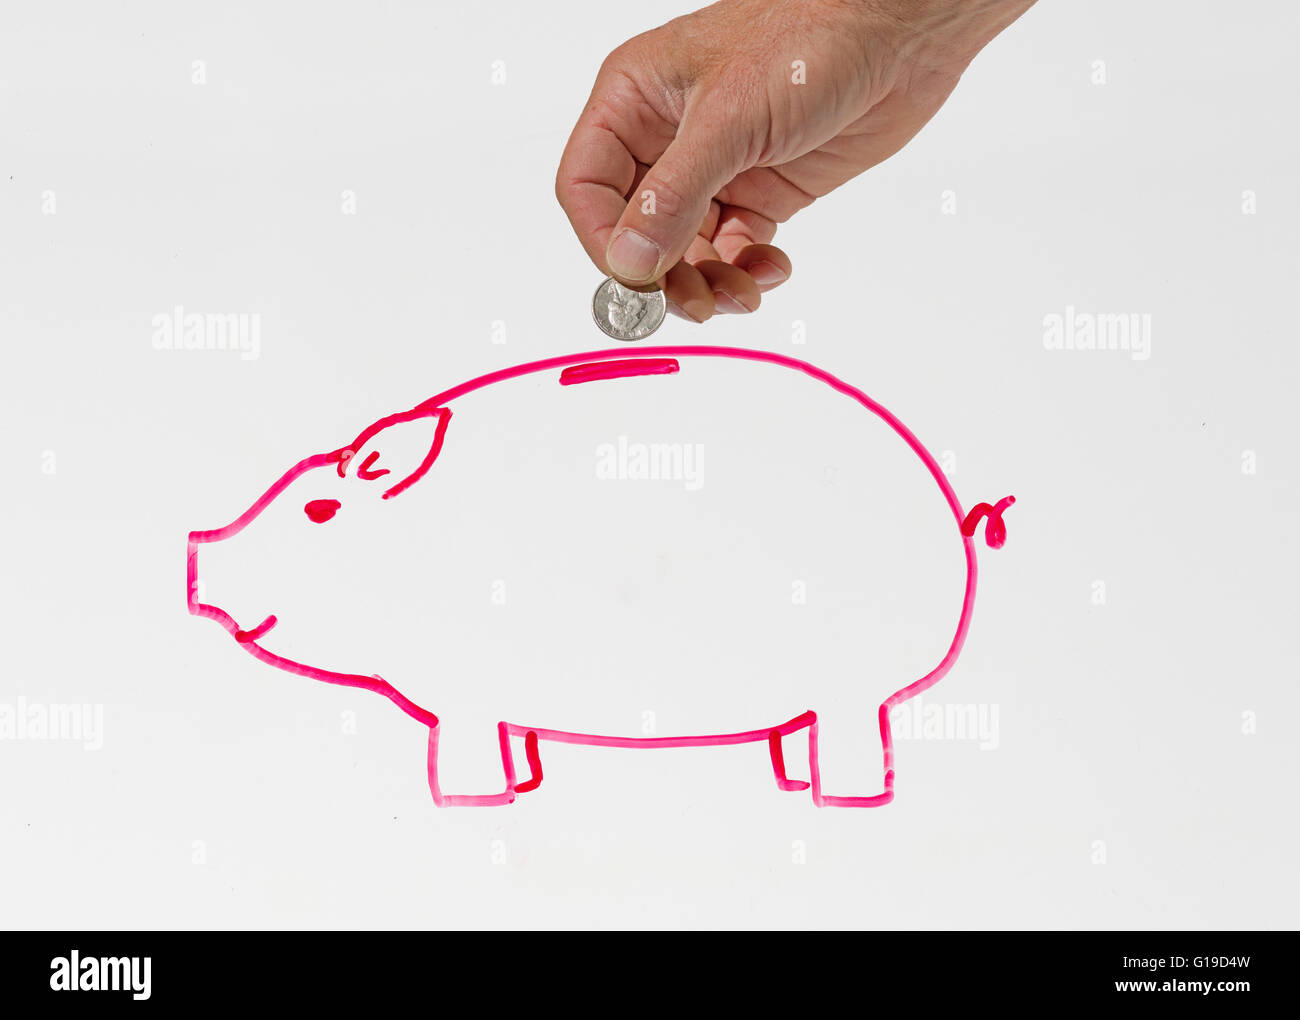 a mans hand putting a coin into a drawing of a piggy bank in pink on a whiteboard Stock Photo